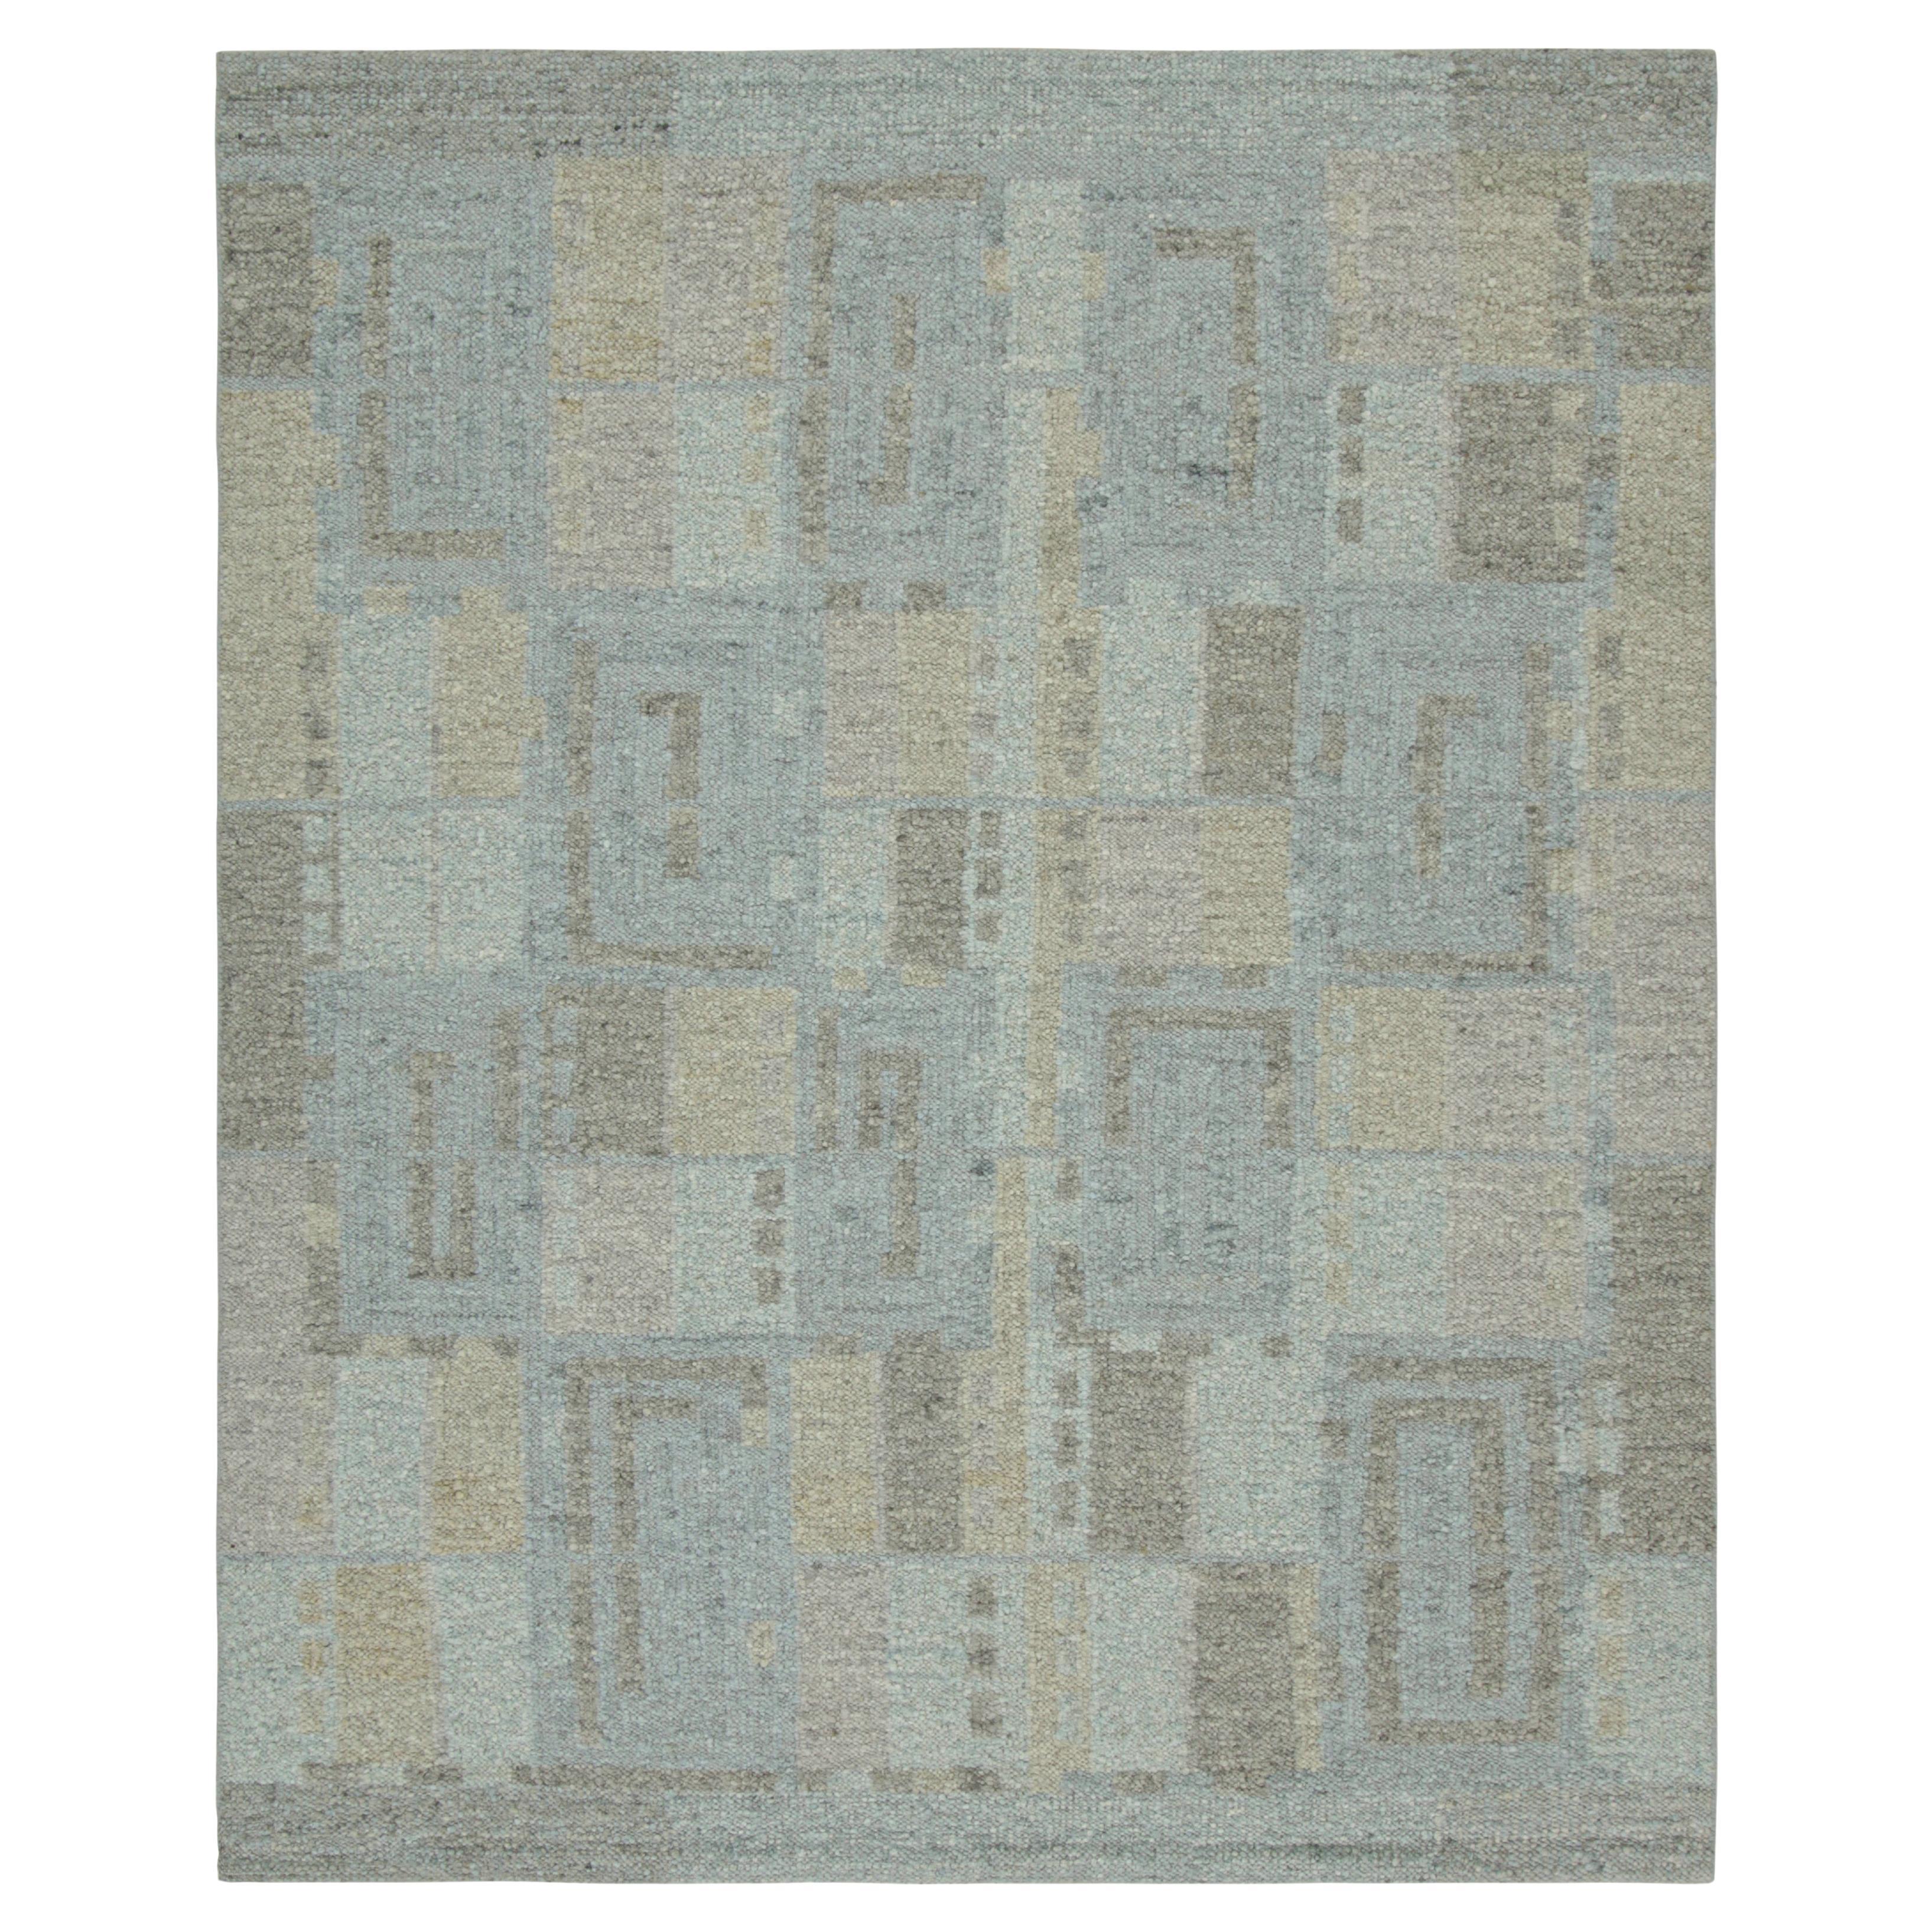 Rug & Kilim’s Scandinavian Style Rug in Blue, Beige and Gray Geometric Patterns For Sale